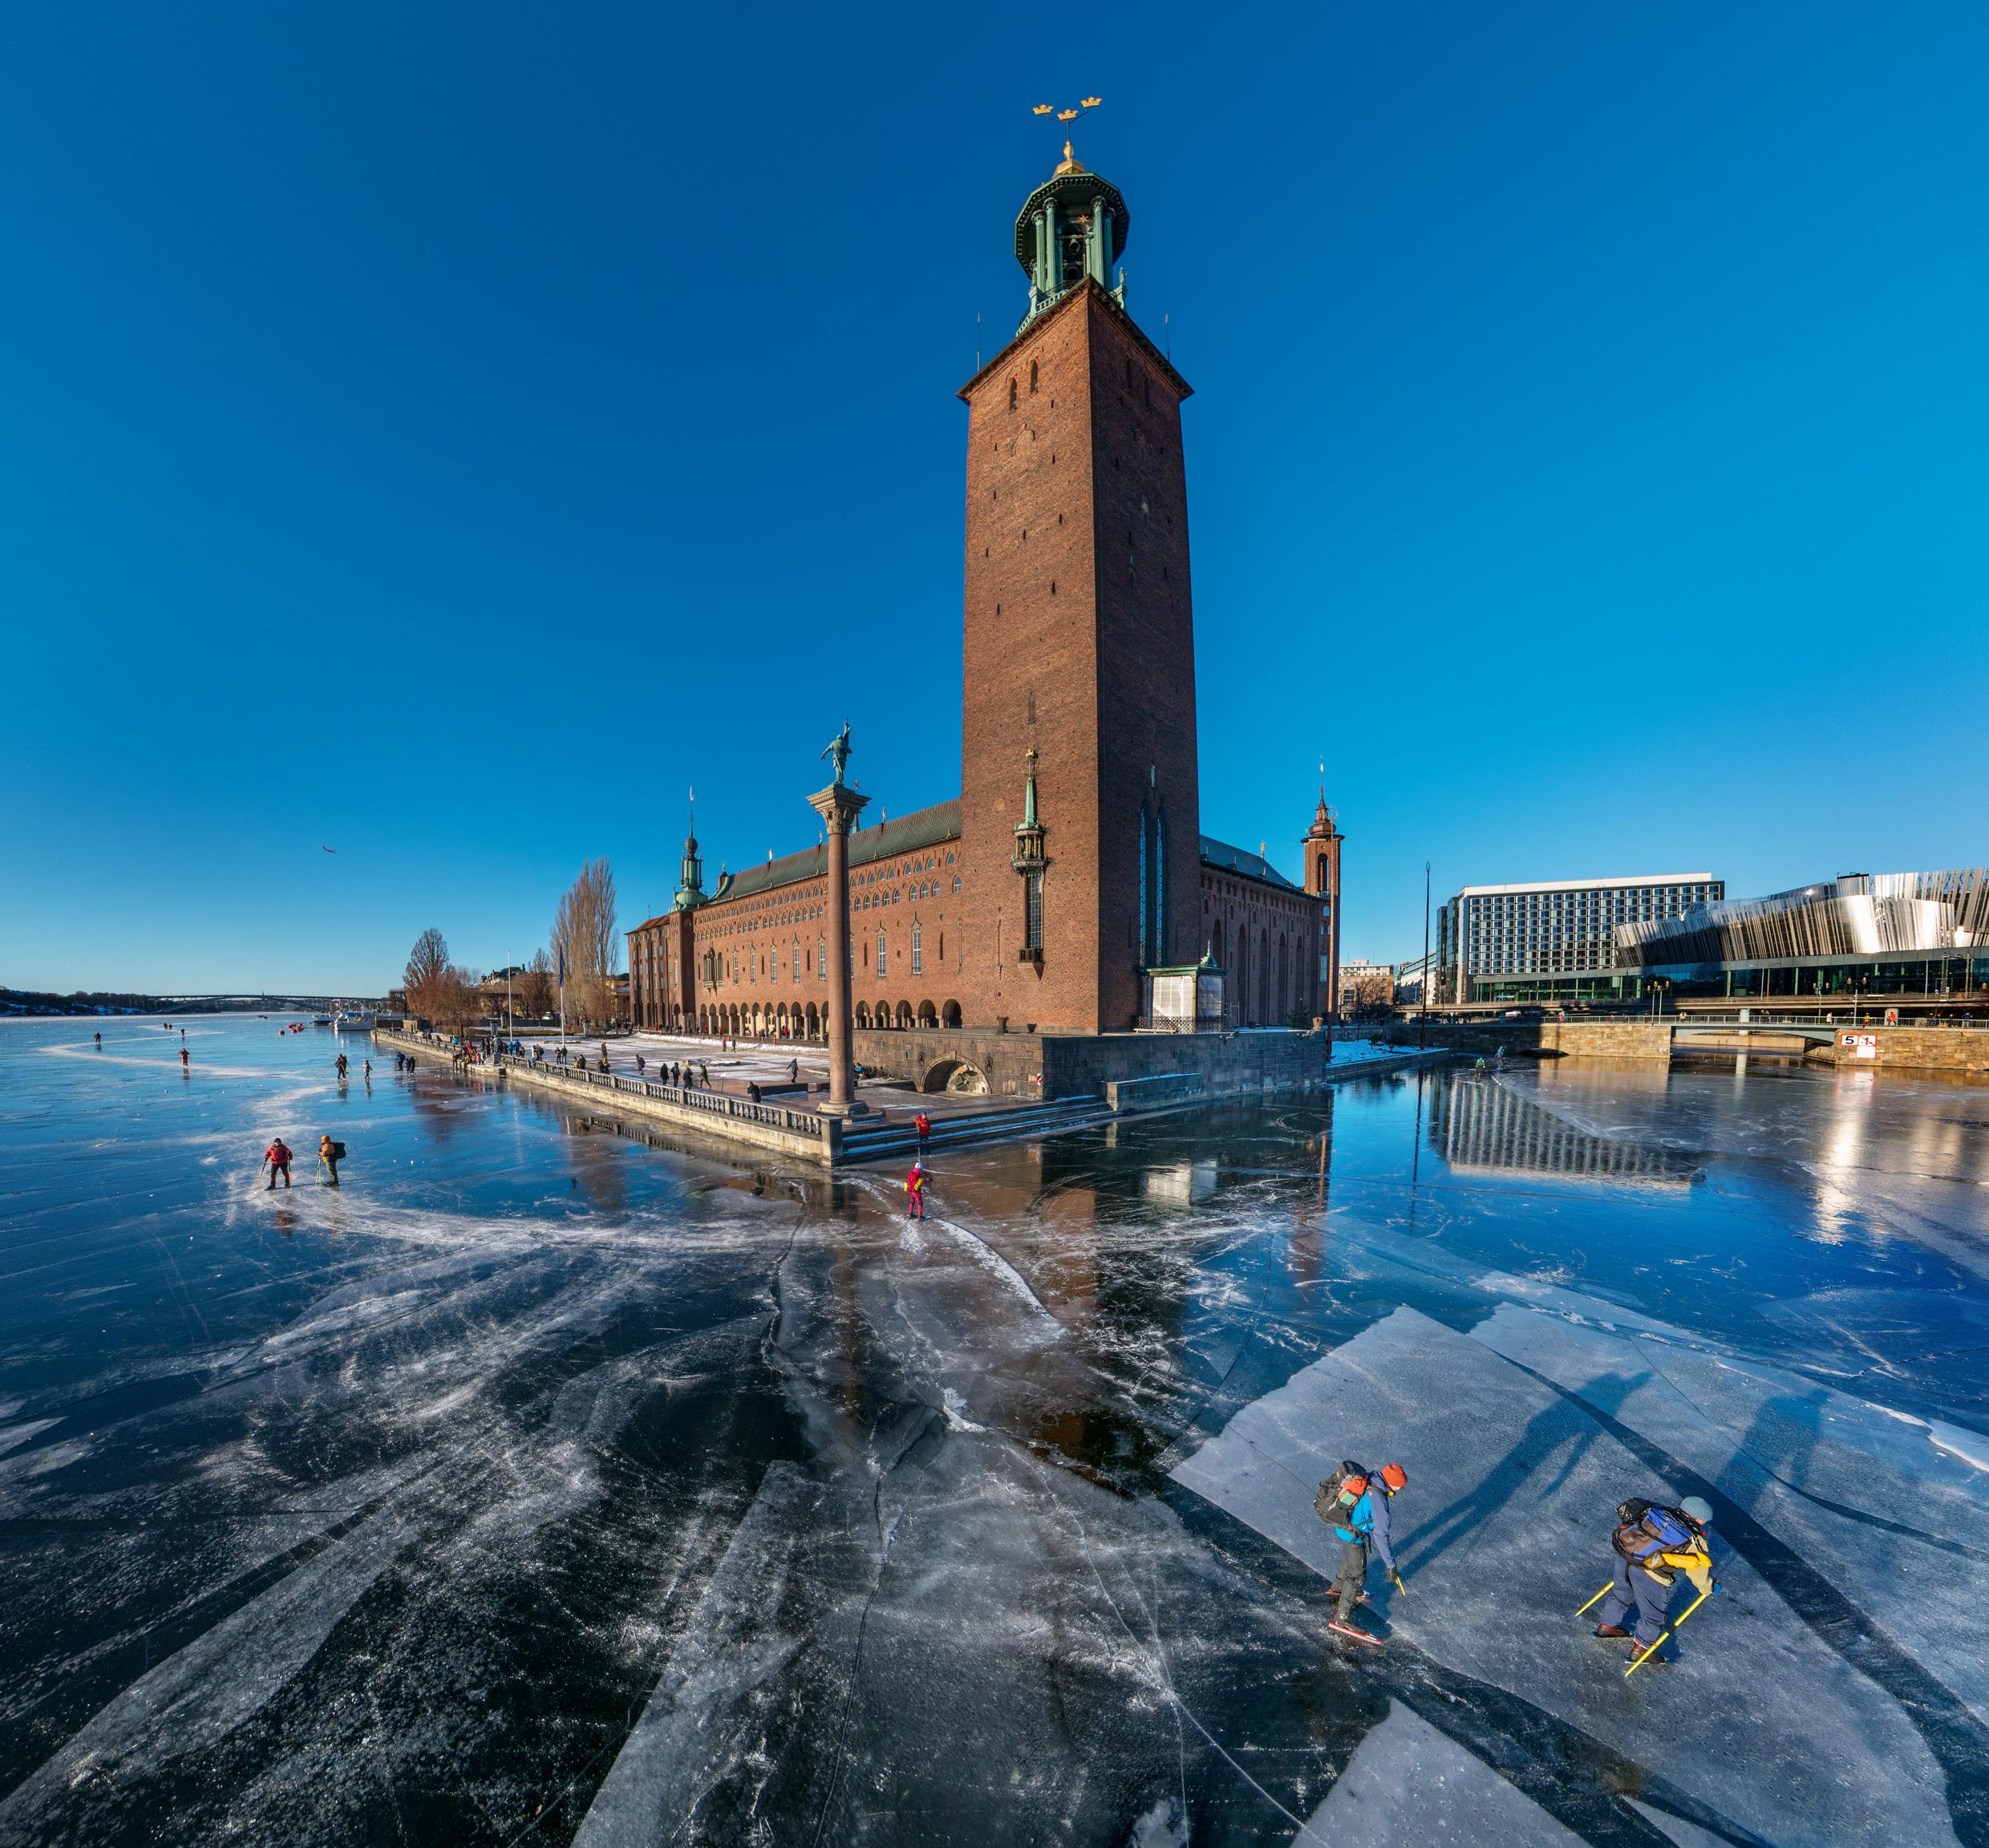 People ice skate around a large brick building with a huge clock tower.